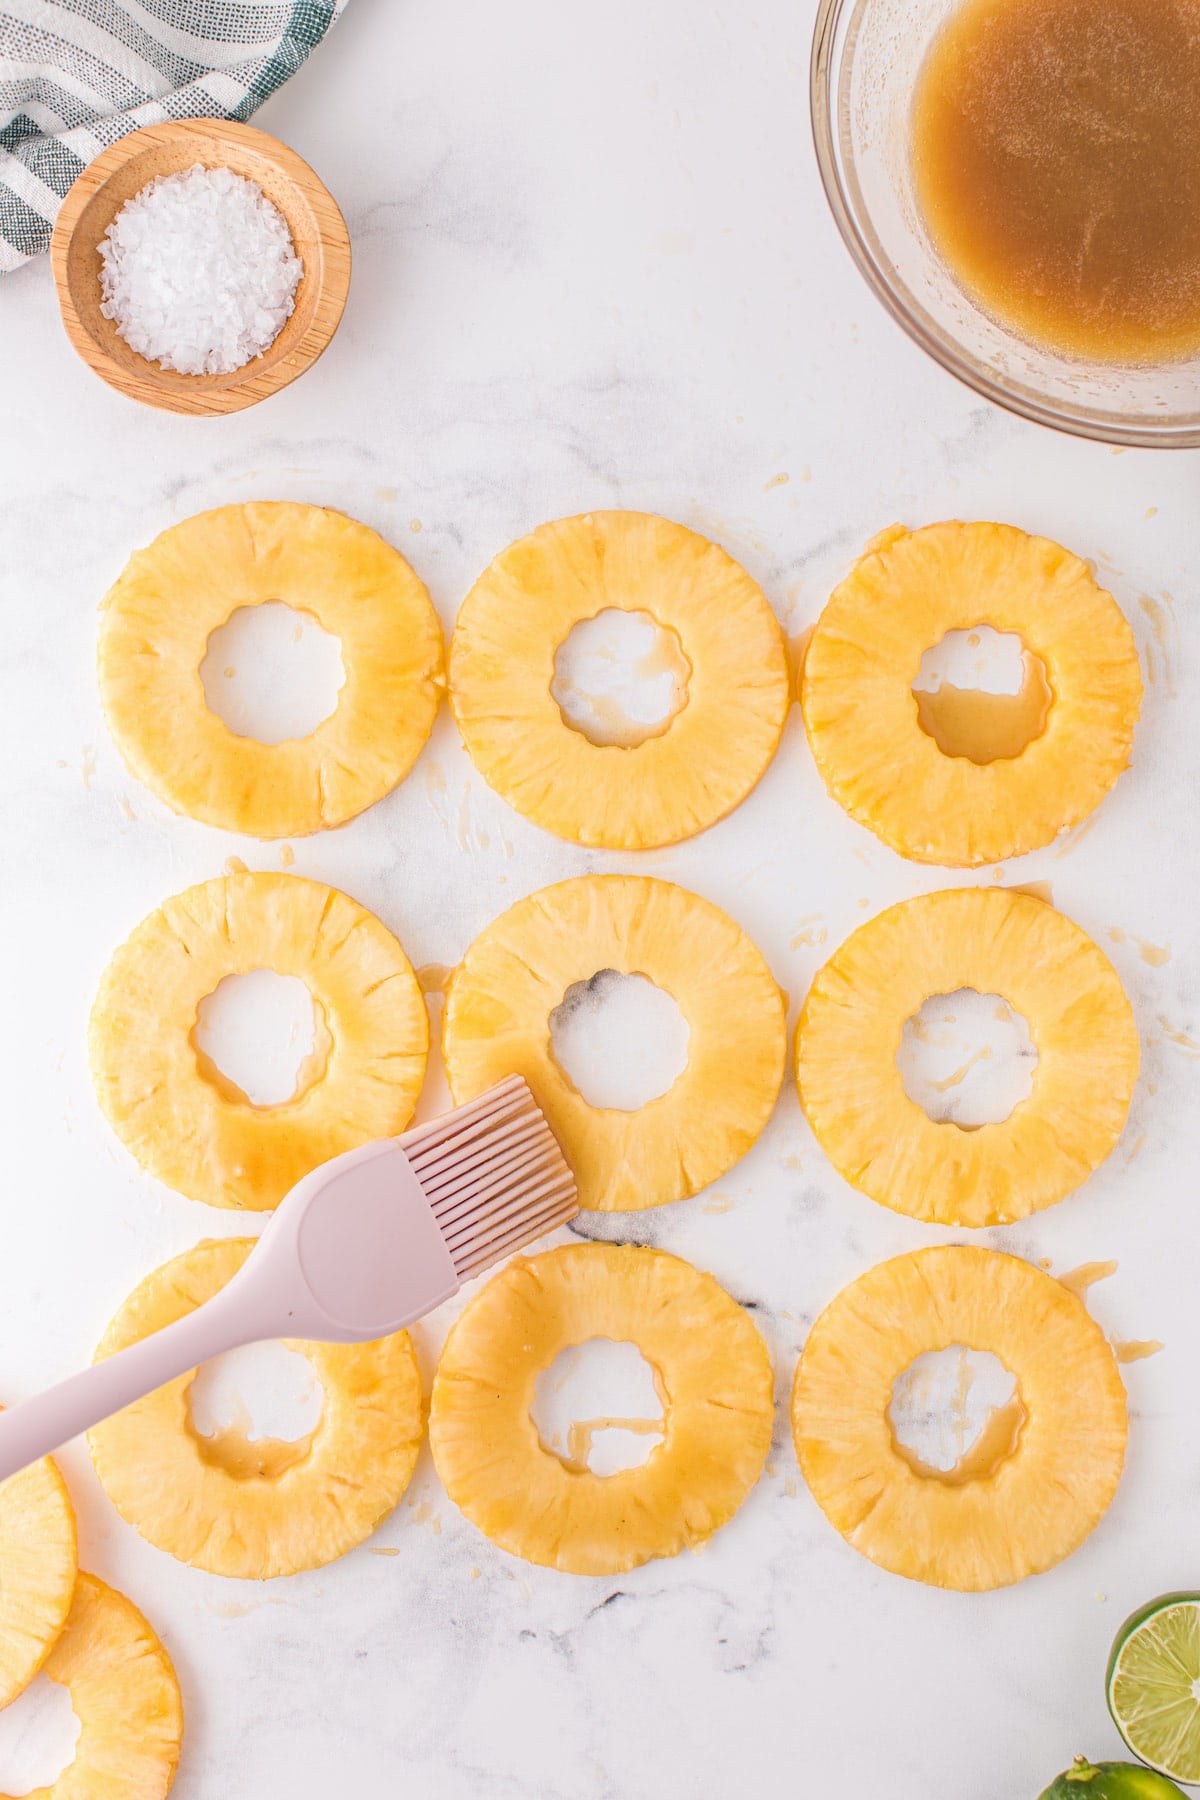 Brush the pineapple on both sides with the mixture